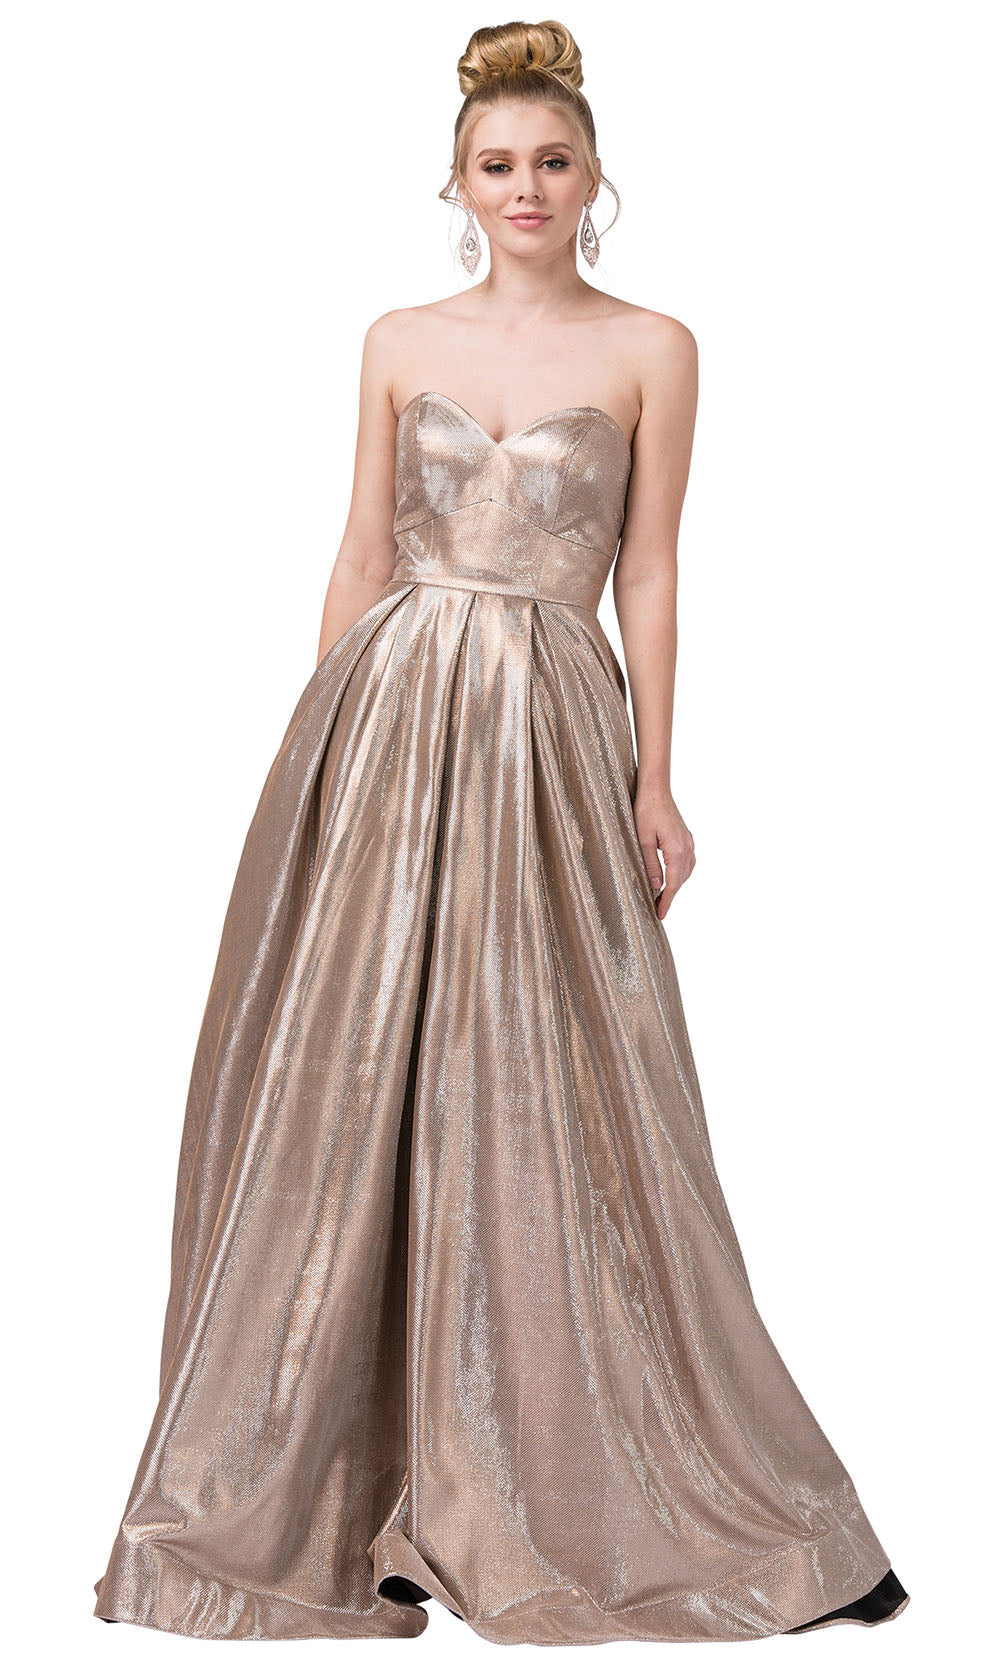 Dancing Queen - 2651 Strapless Shimmer Metallic A-Line Gown In Champagne & Gold